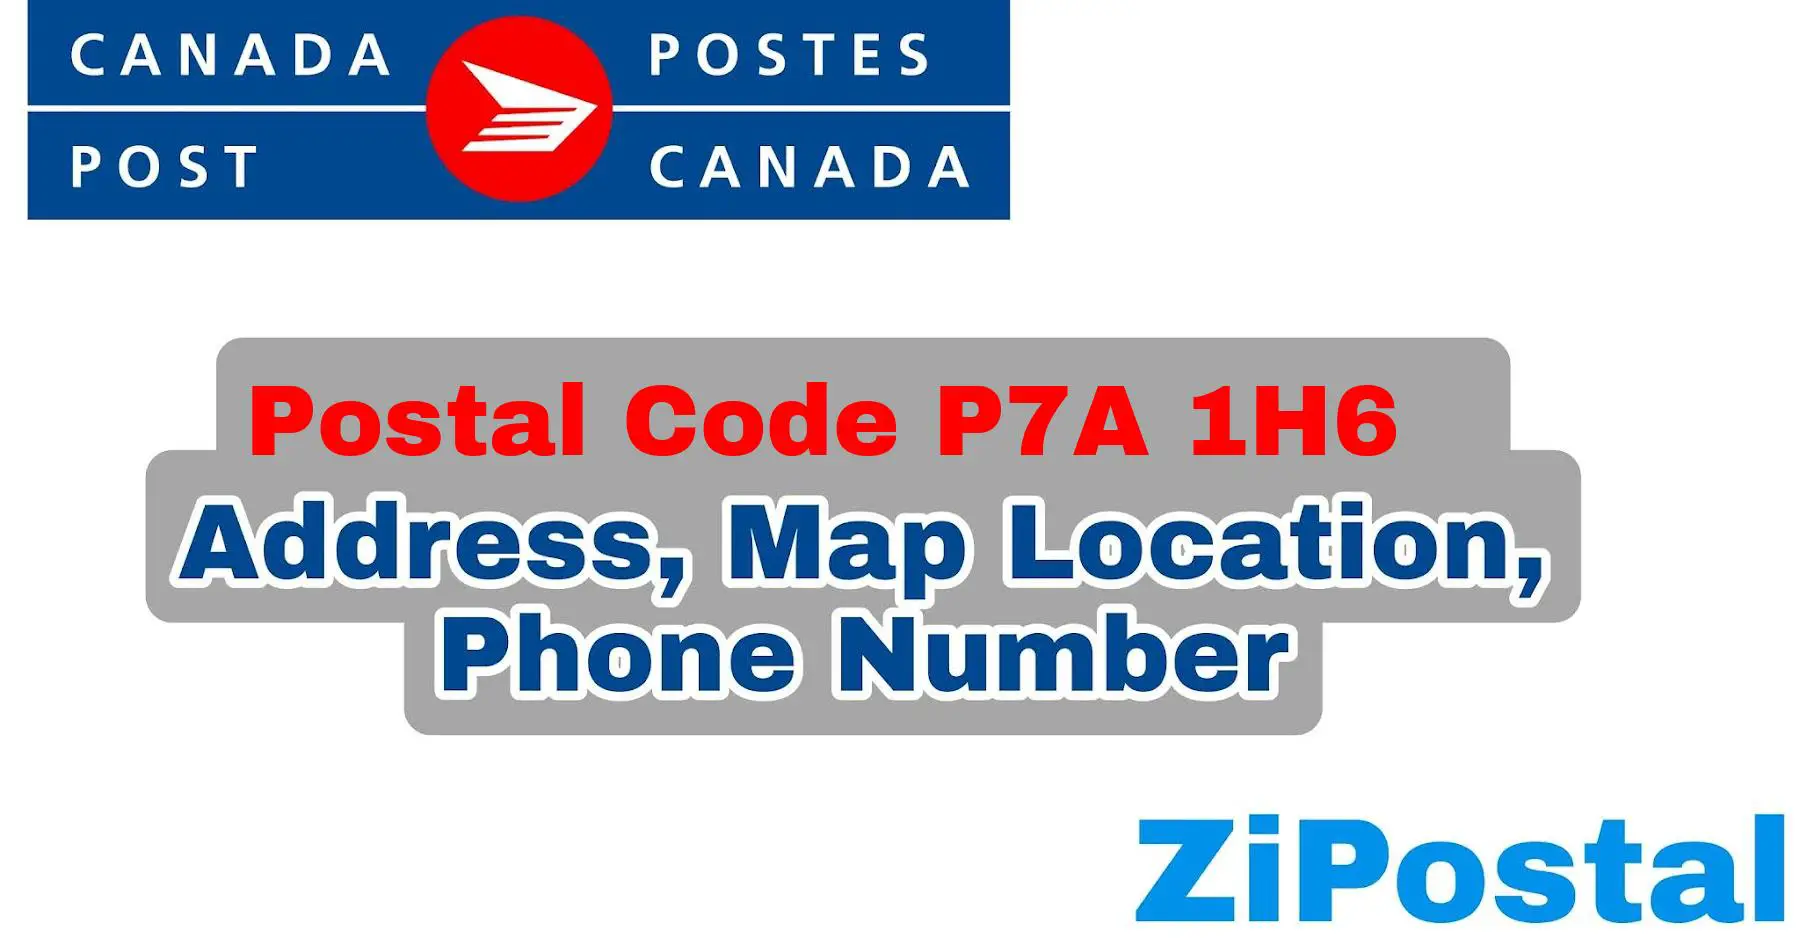 Postal Code P7A 1H6 Address Map Location and Phone Number